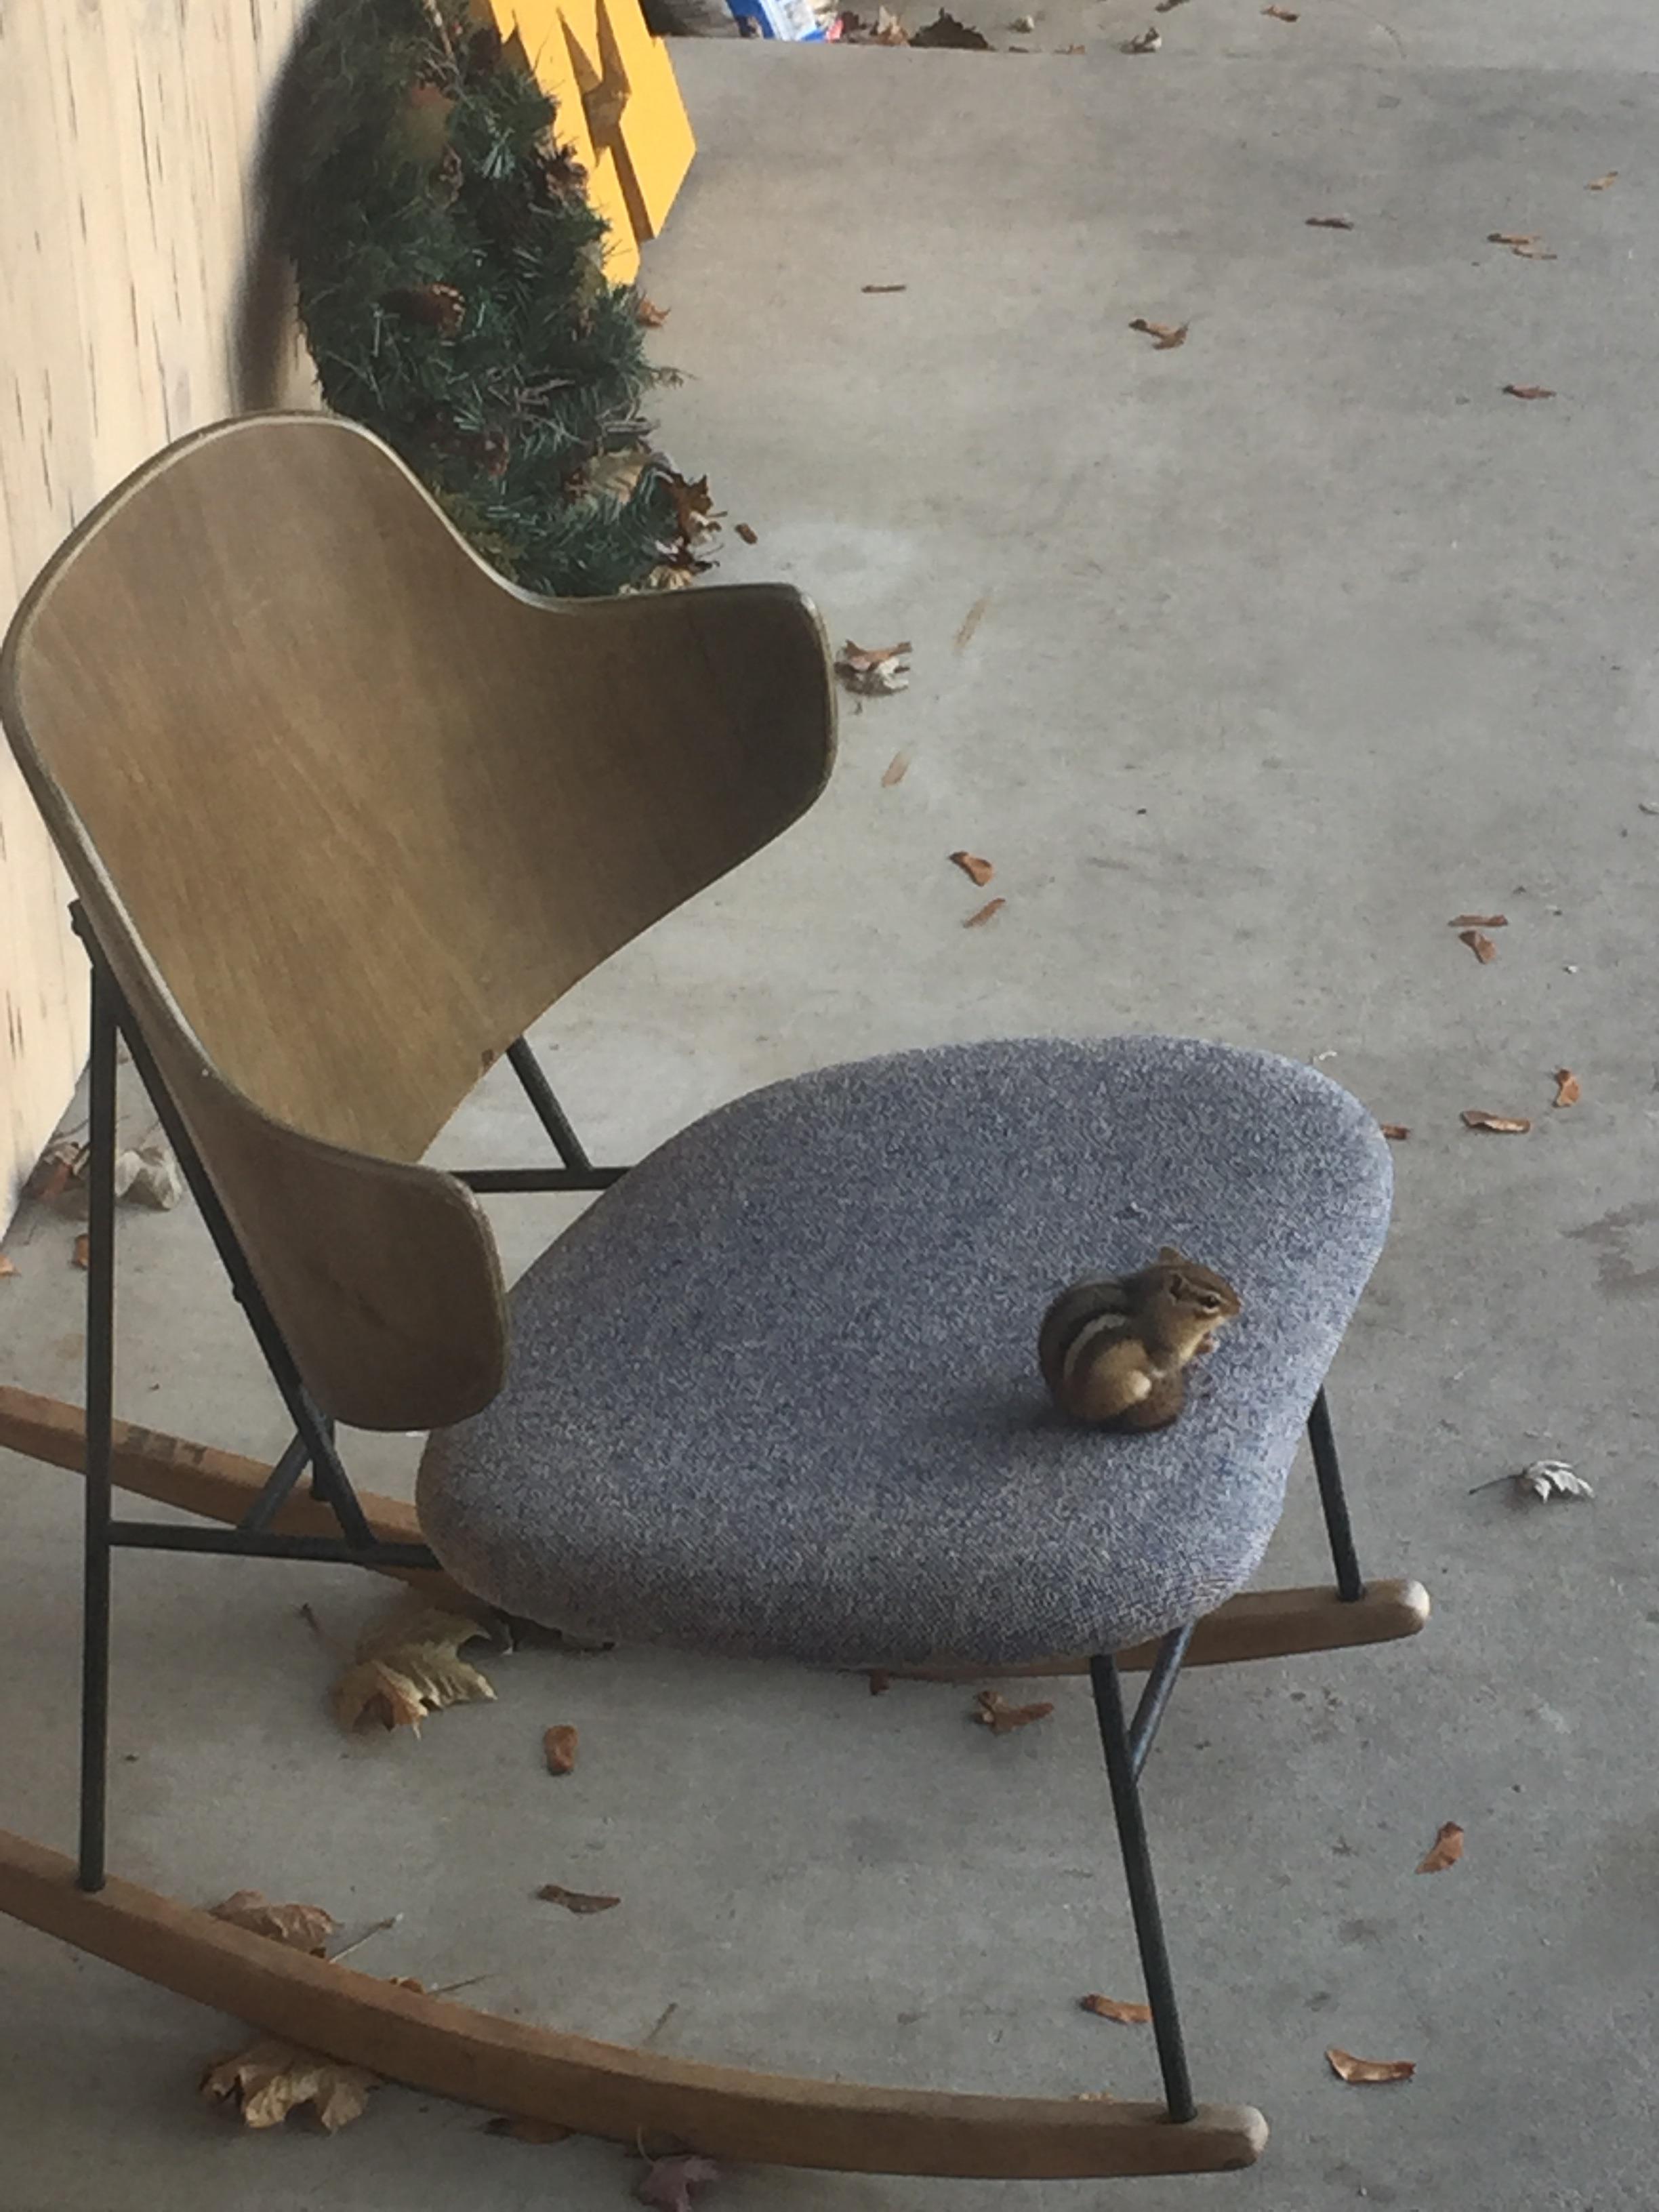 Regular sized chipmunks in ordinary sized chairs eating nuts, probably.